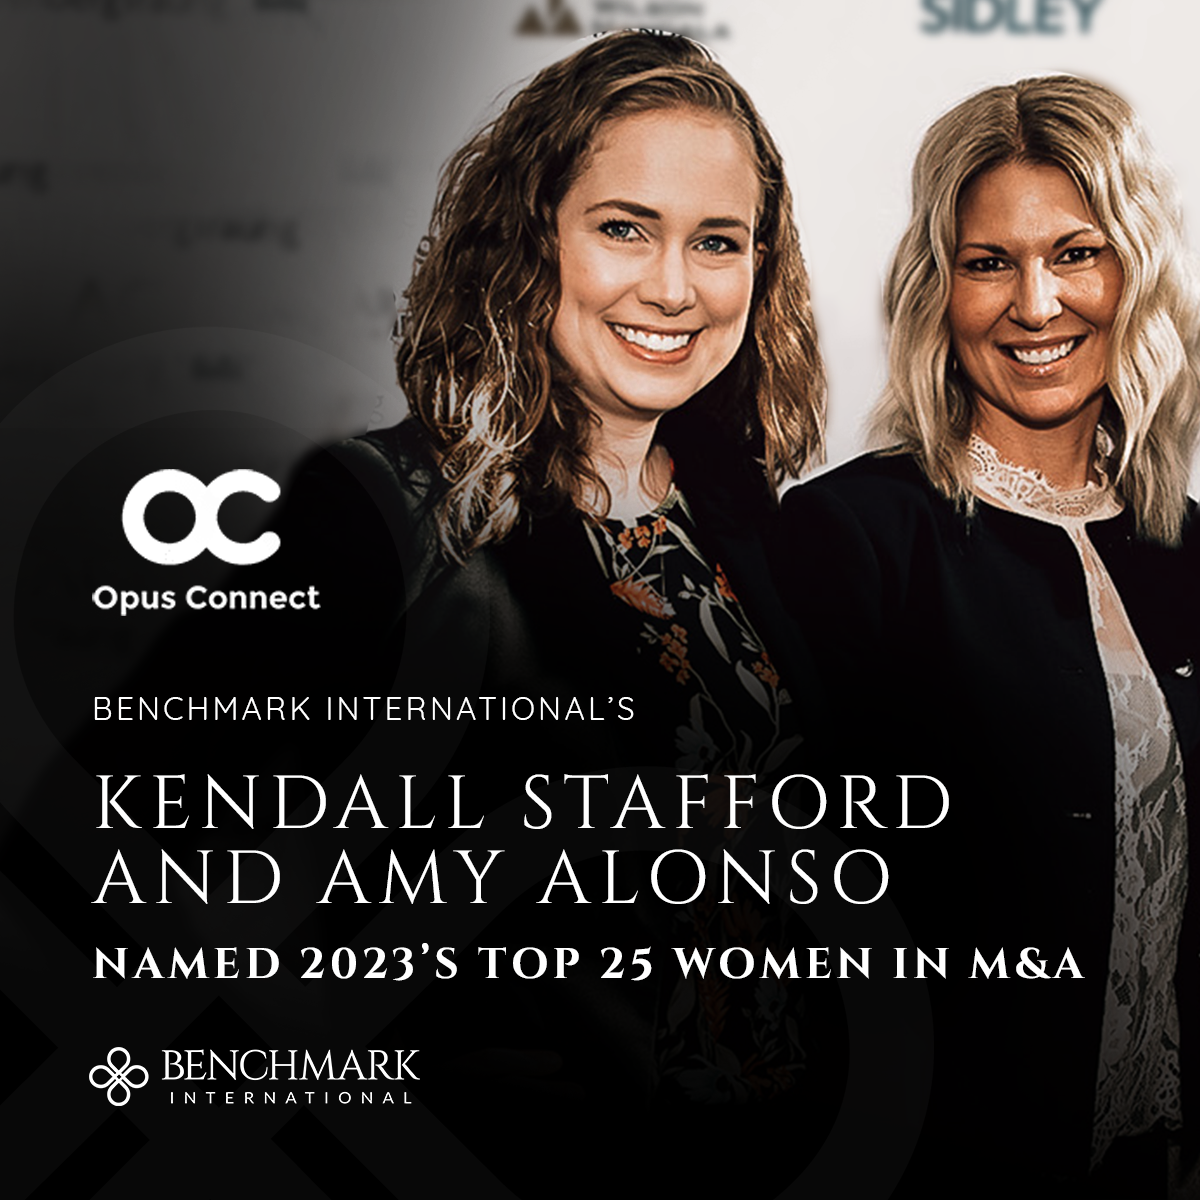 Benchmarks Amy Alonso And Kendall Stafford Named Top 25 Women In M&A_1Social